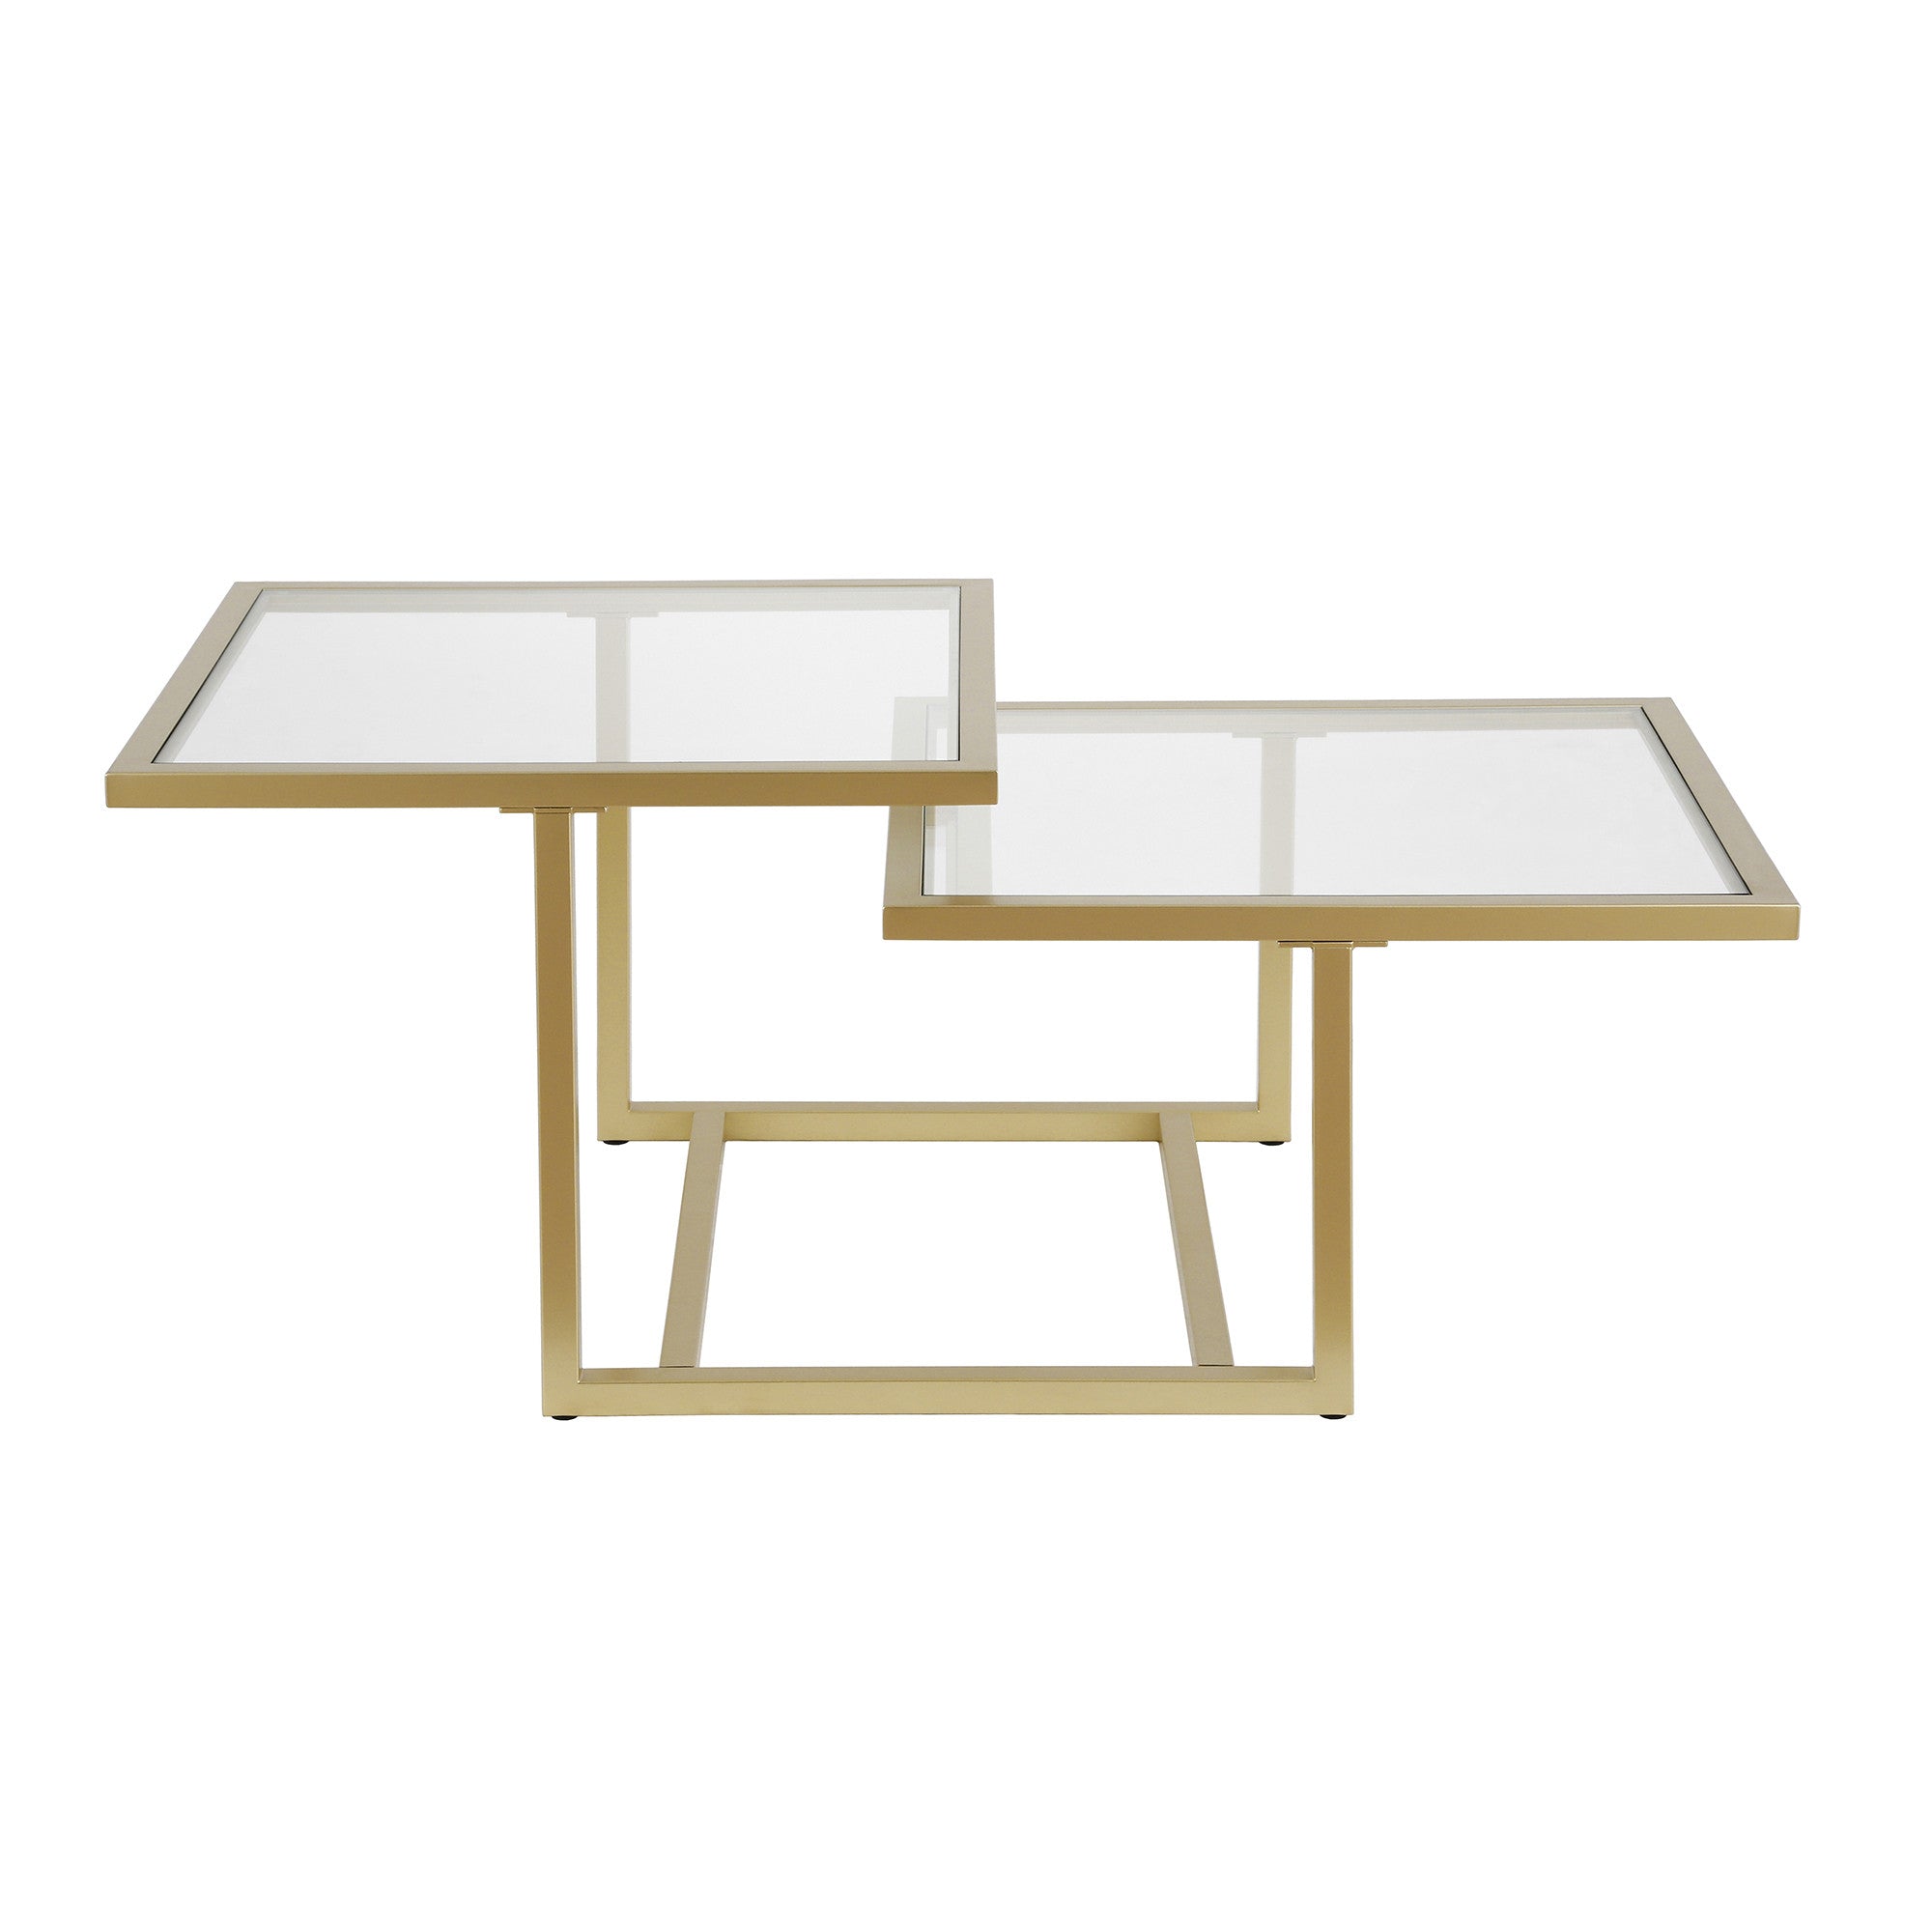 43" Gold Glass And Steel Square Coffee Table With Two Shelves